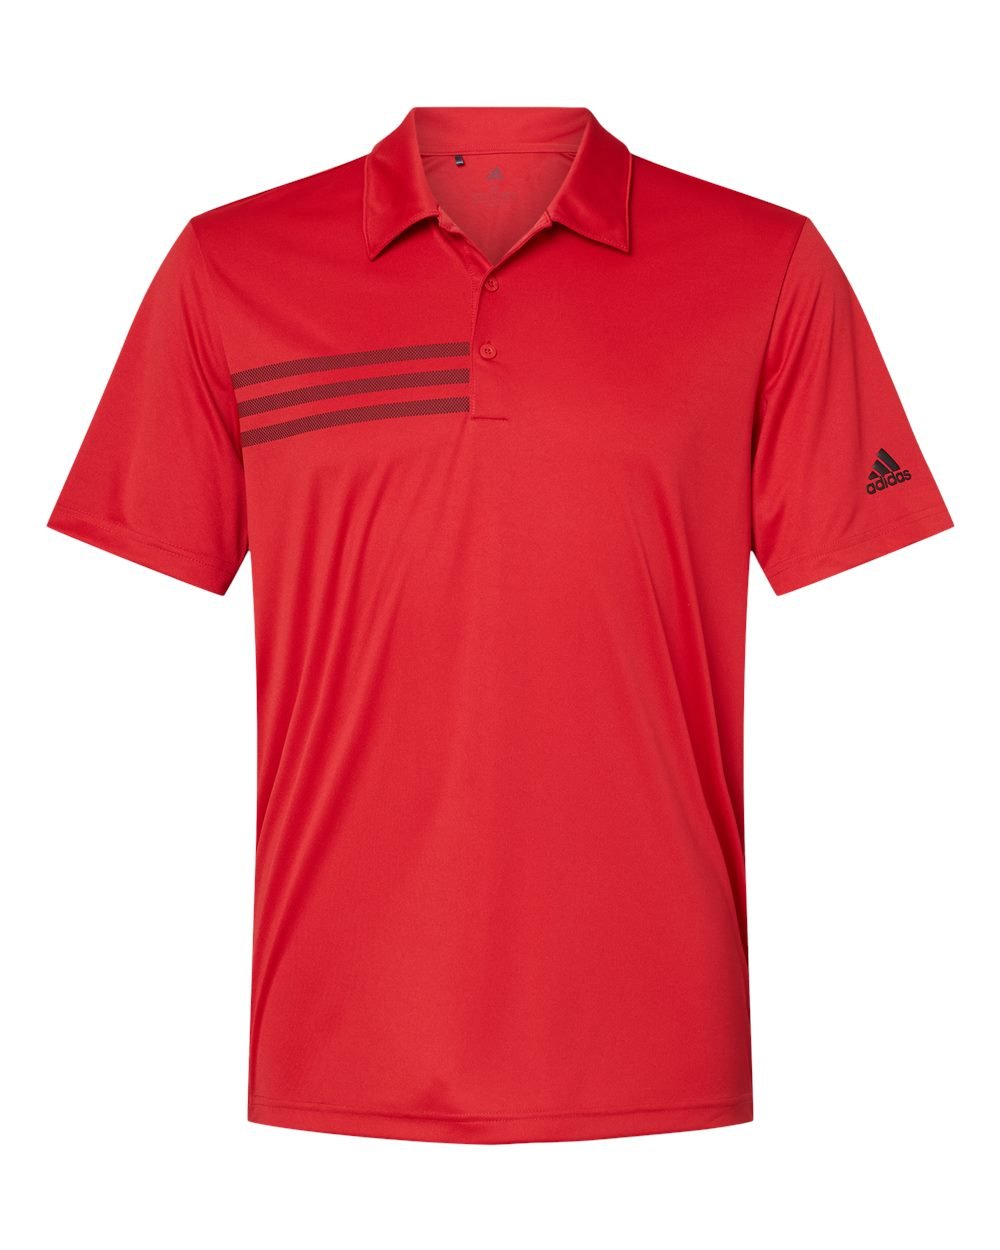 Adidas  A324 3-Stripes Chest Polo Men's T-Shirt #color_Collegiate Red/ Black